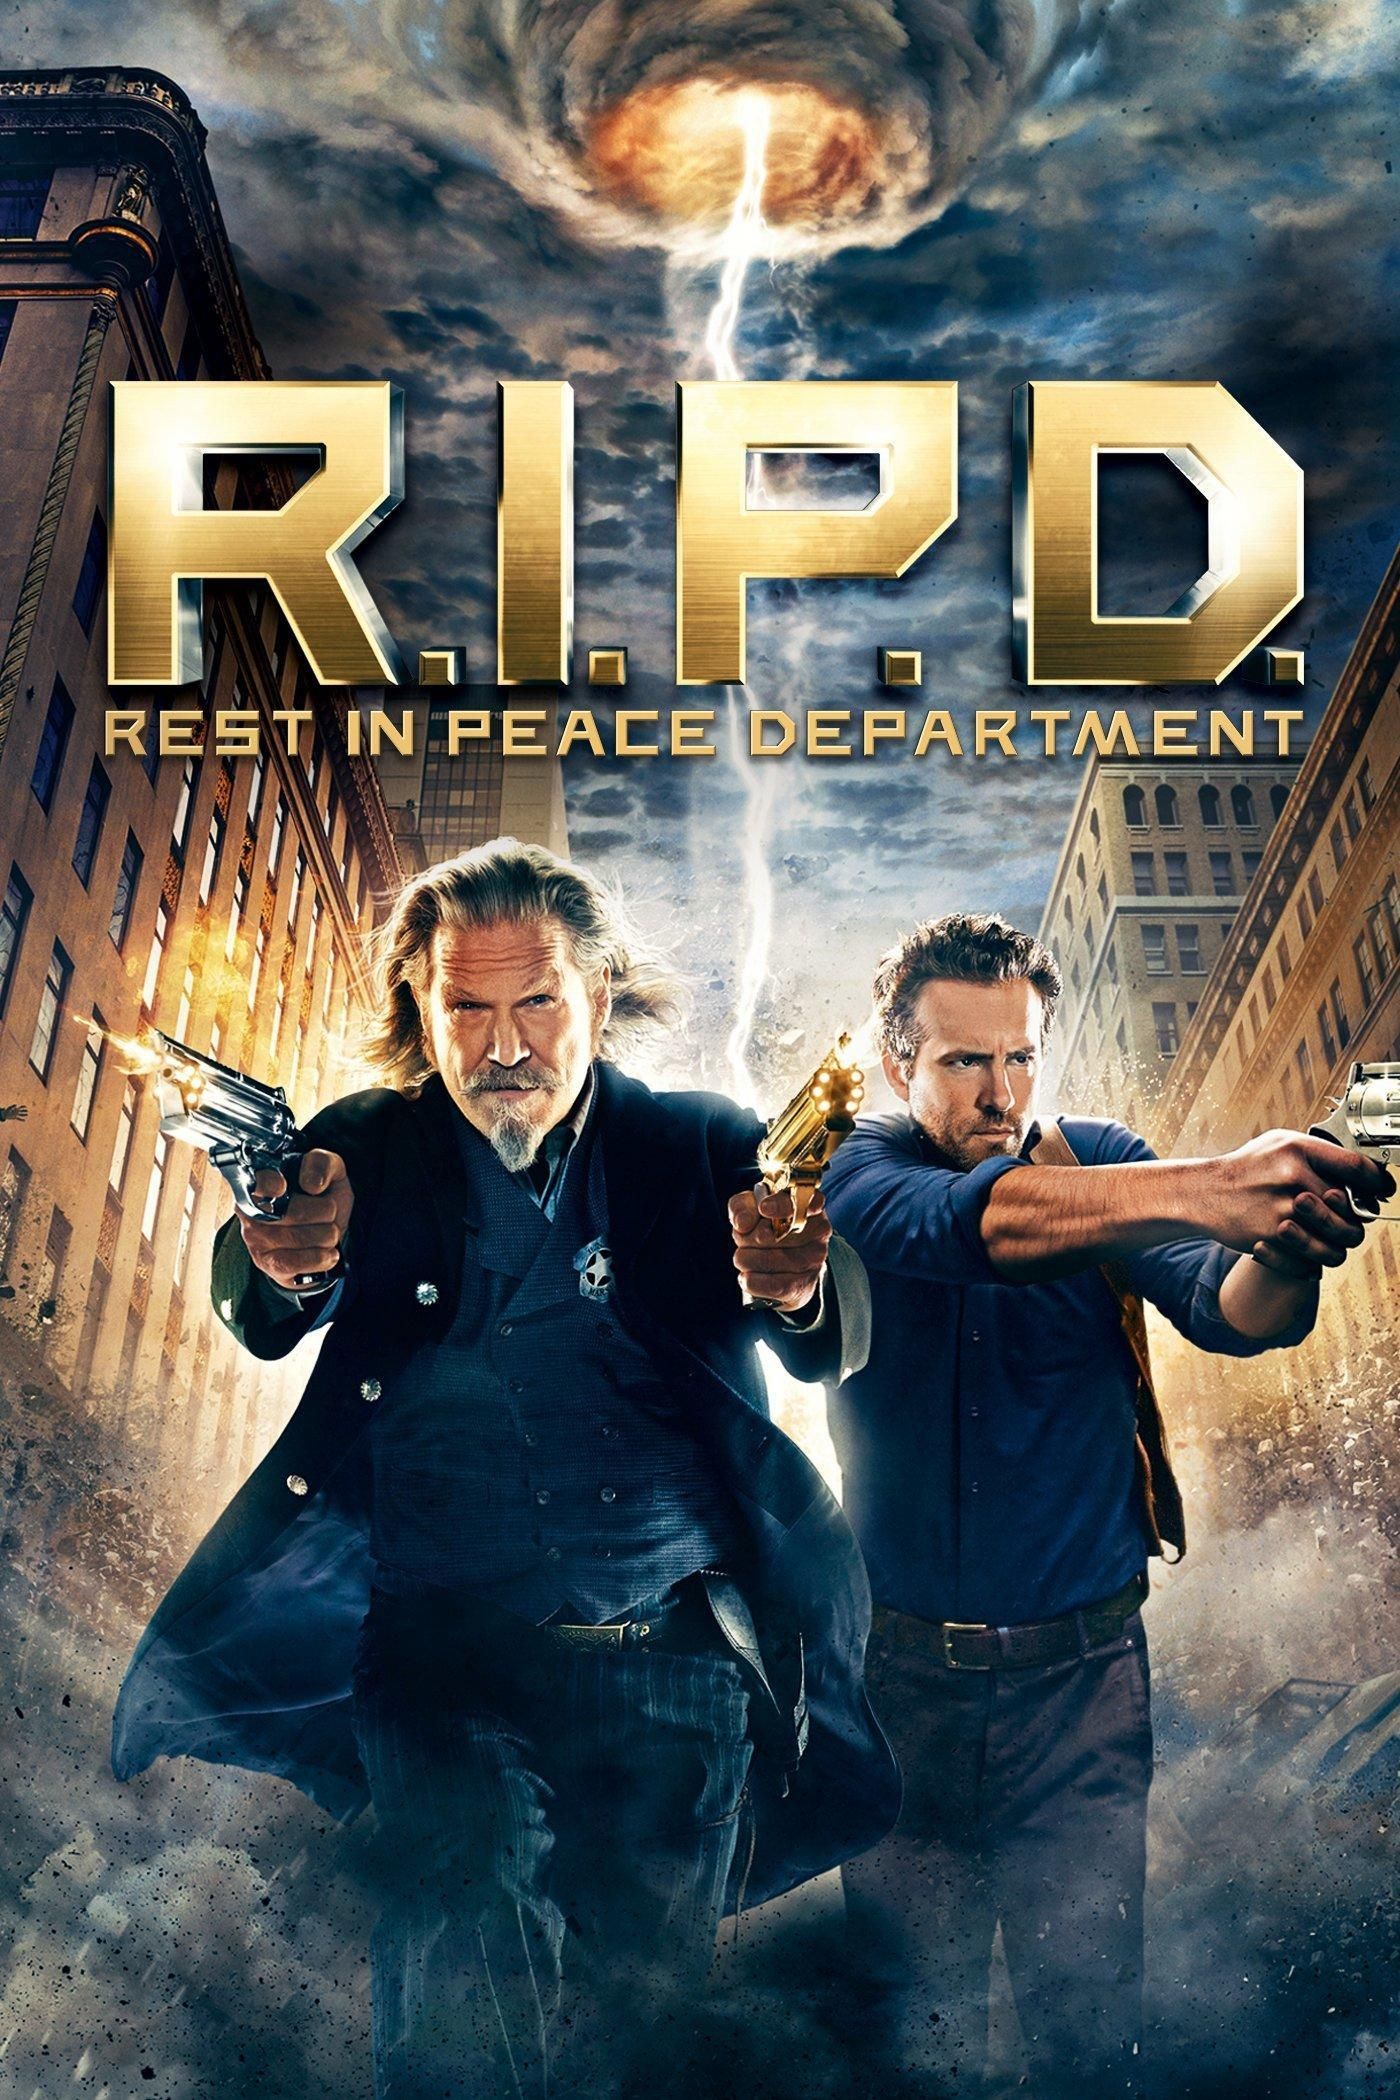 R.I.P.D. (2013) Movie Information & Trailers